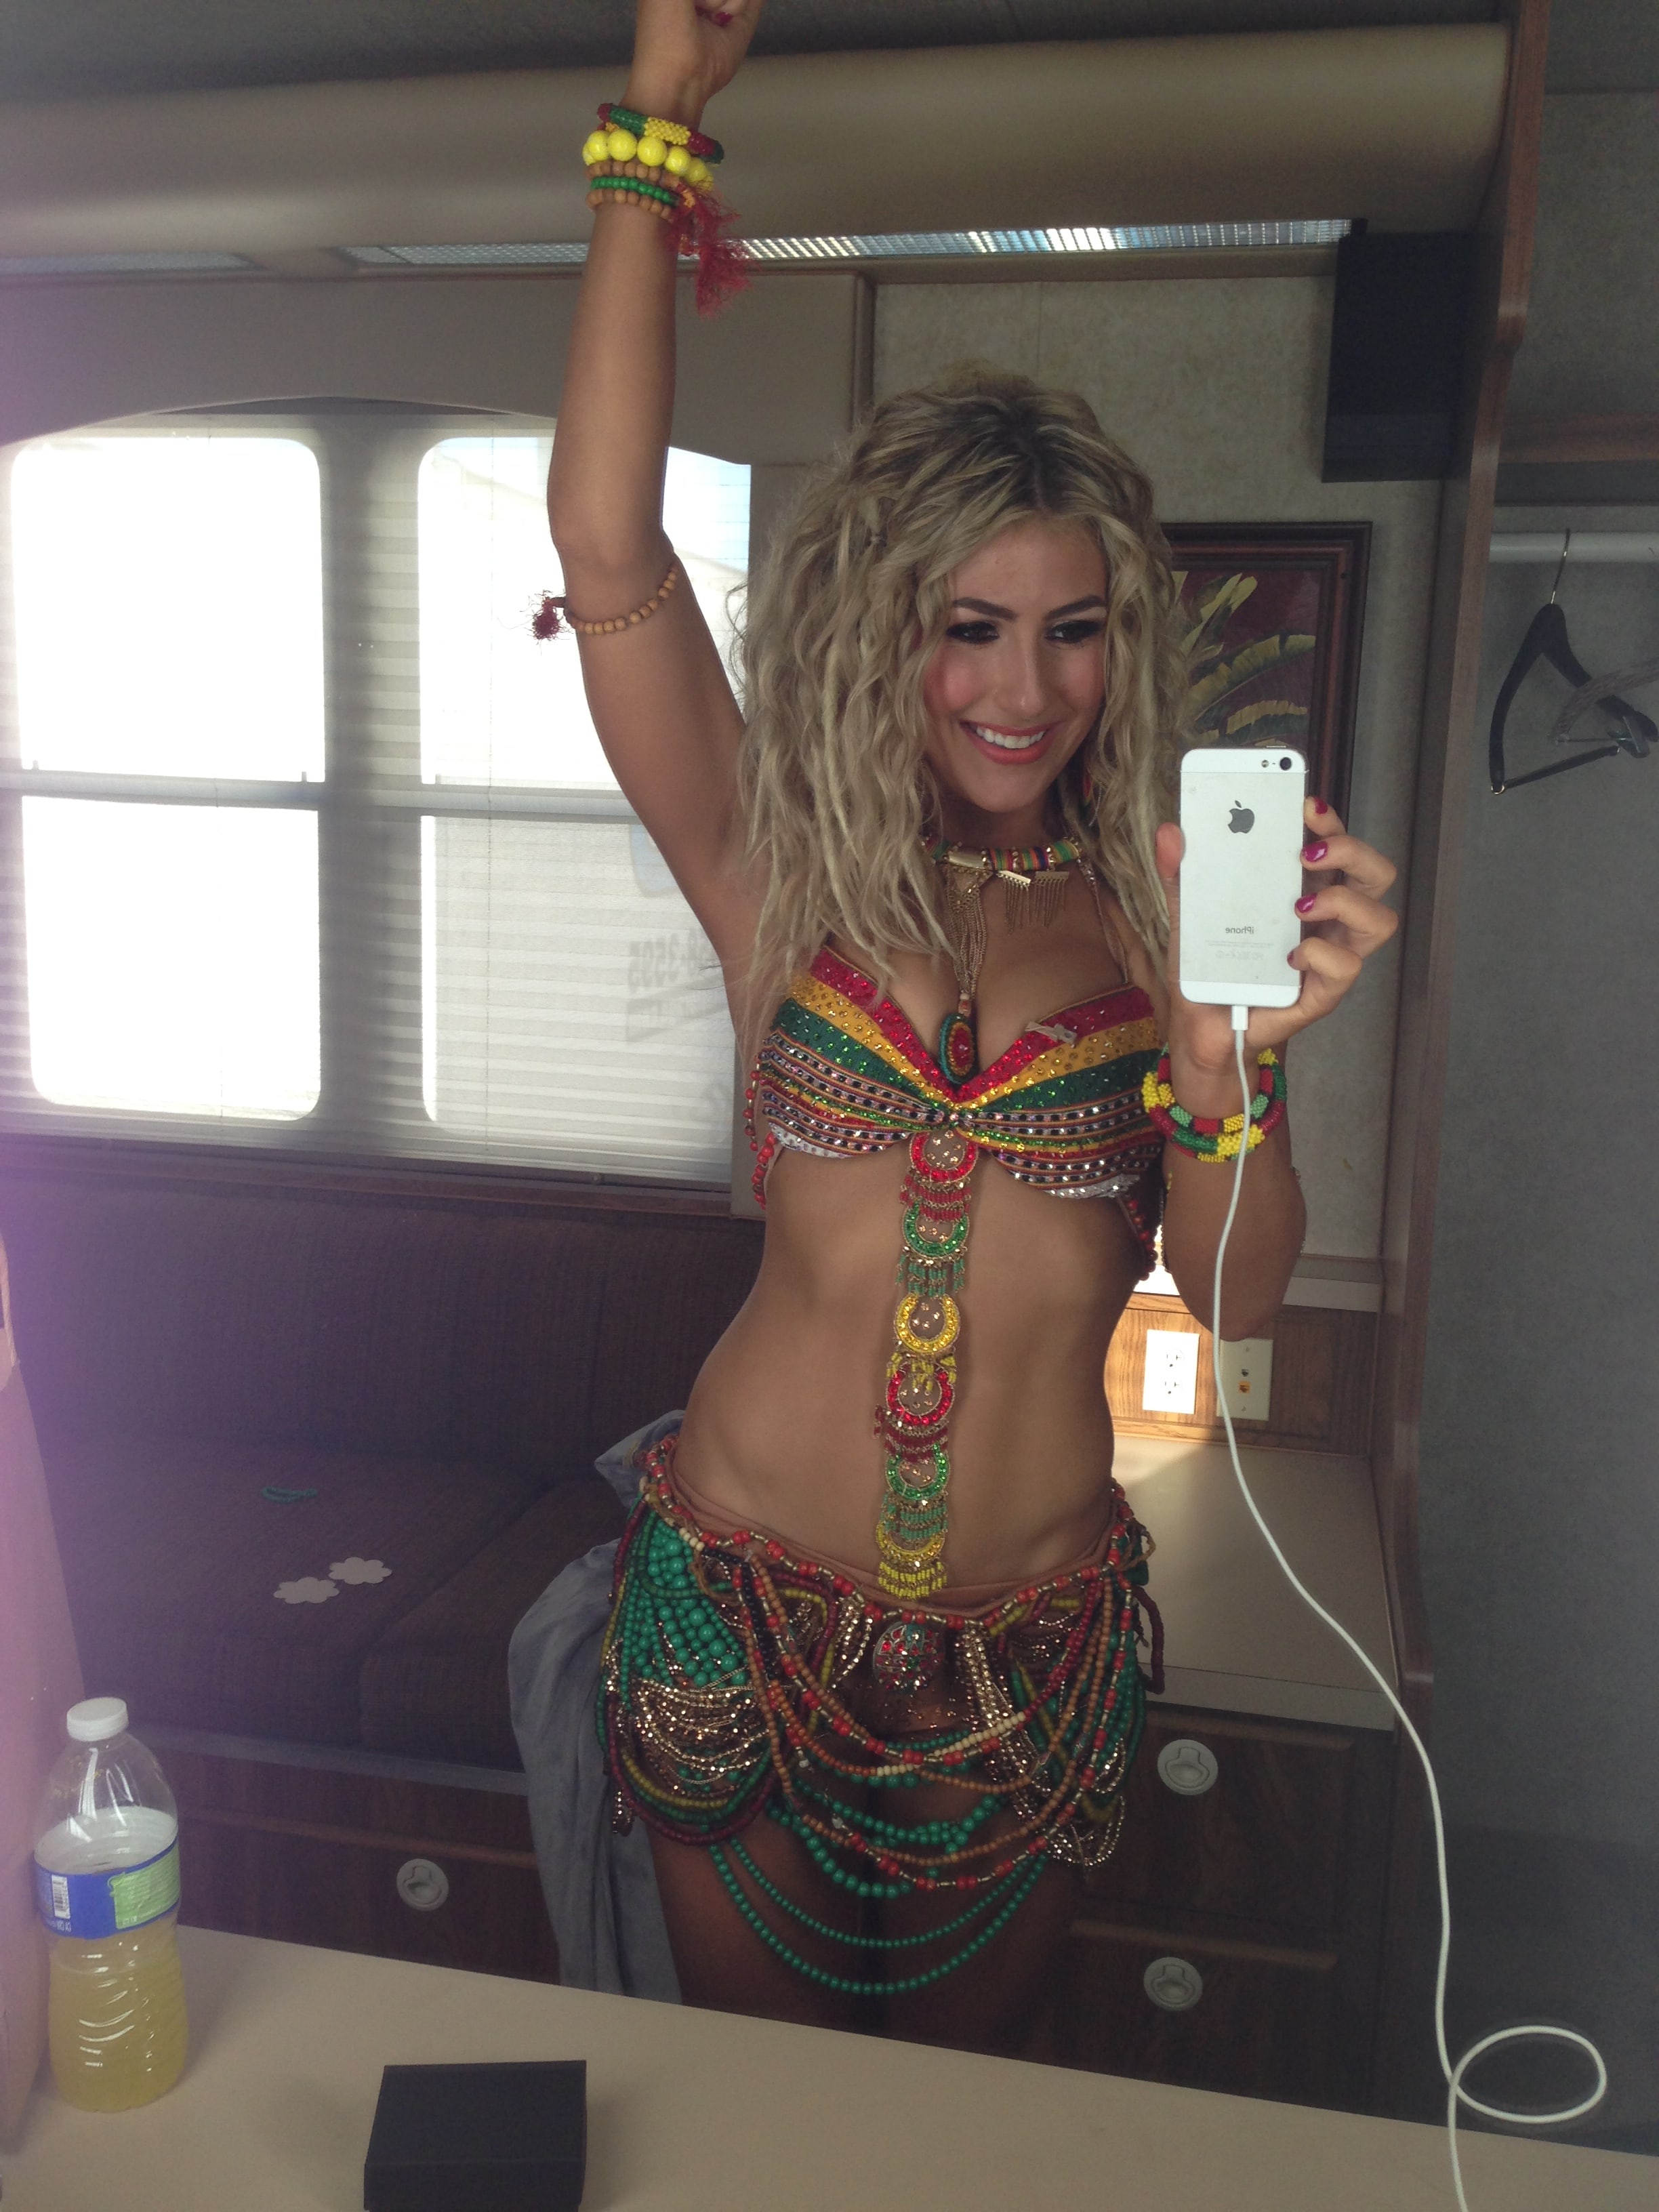 Dancing with the stars' emma slater se filtra
 #79530690